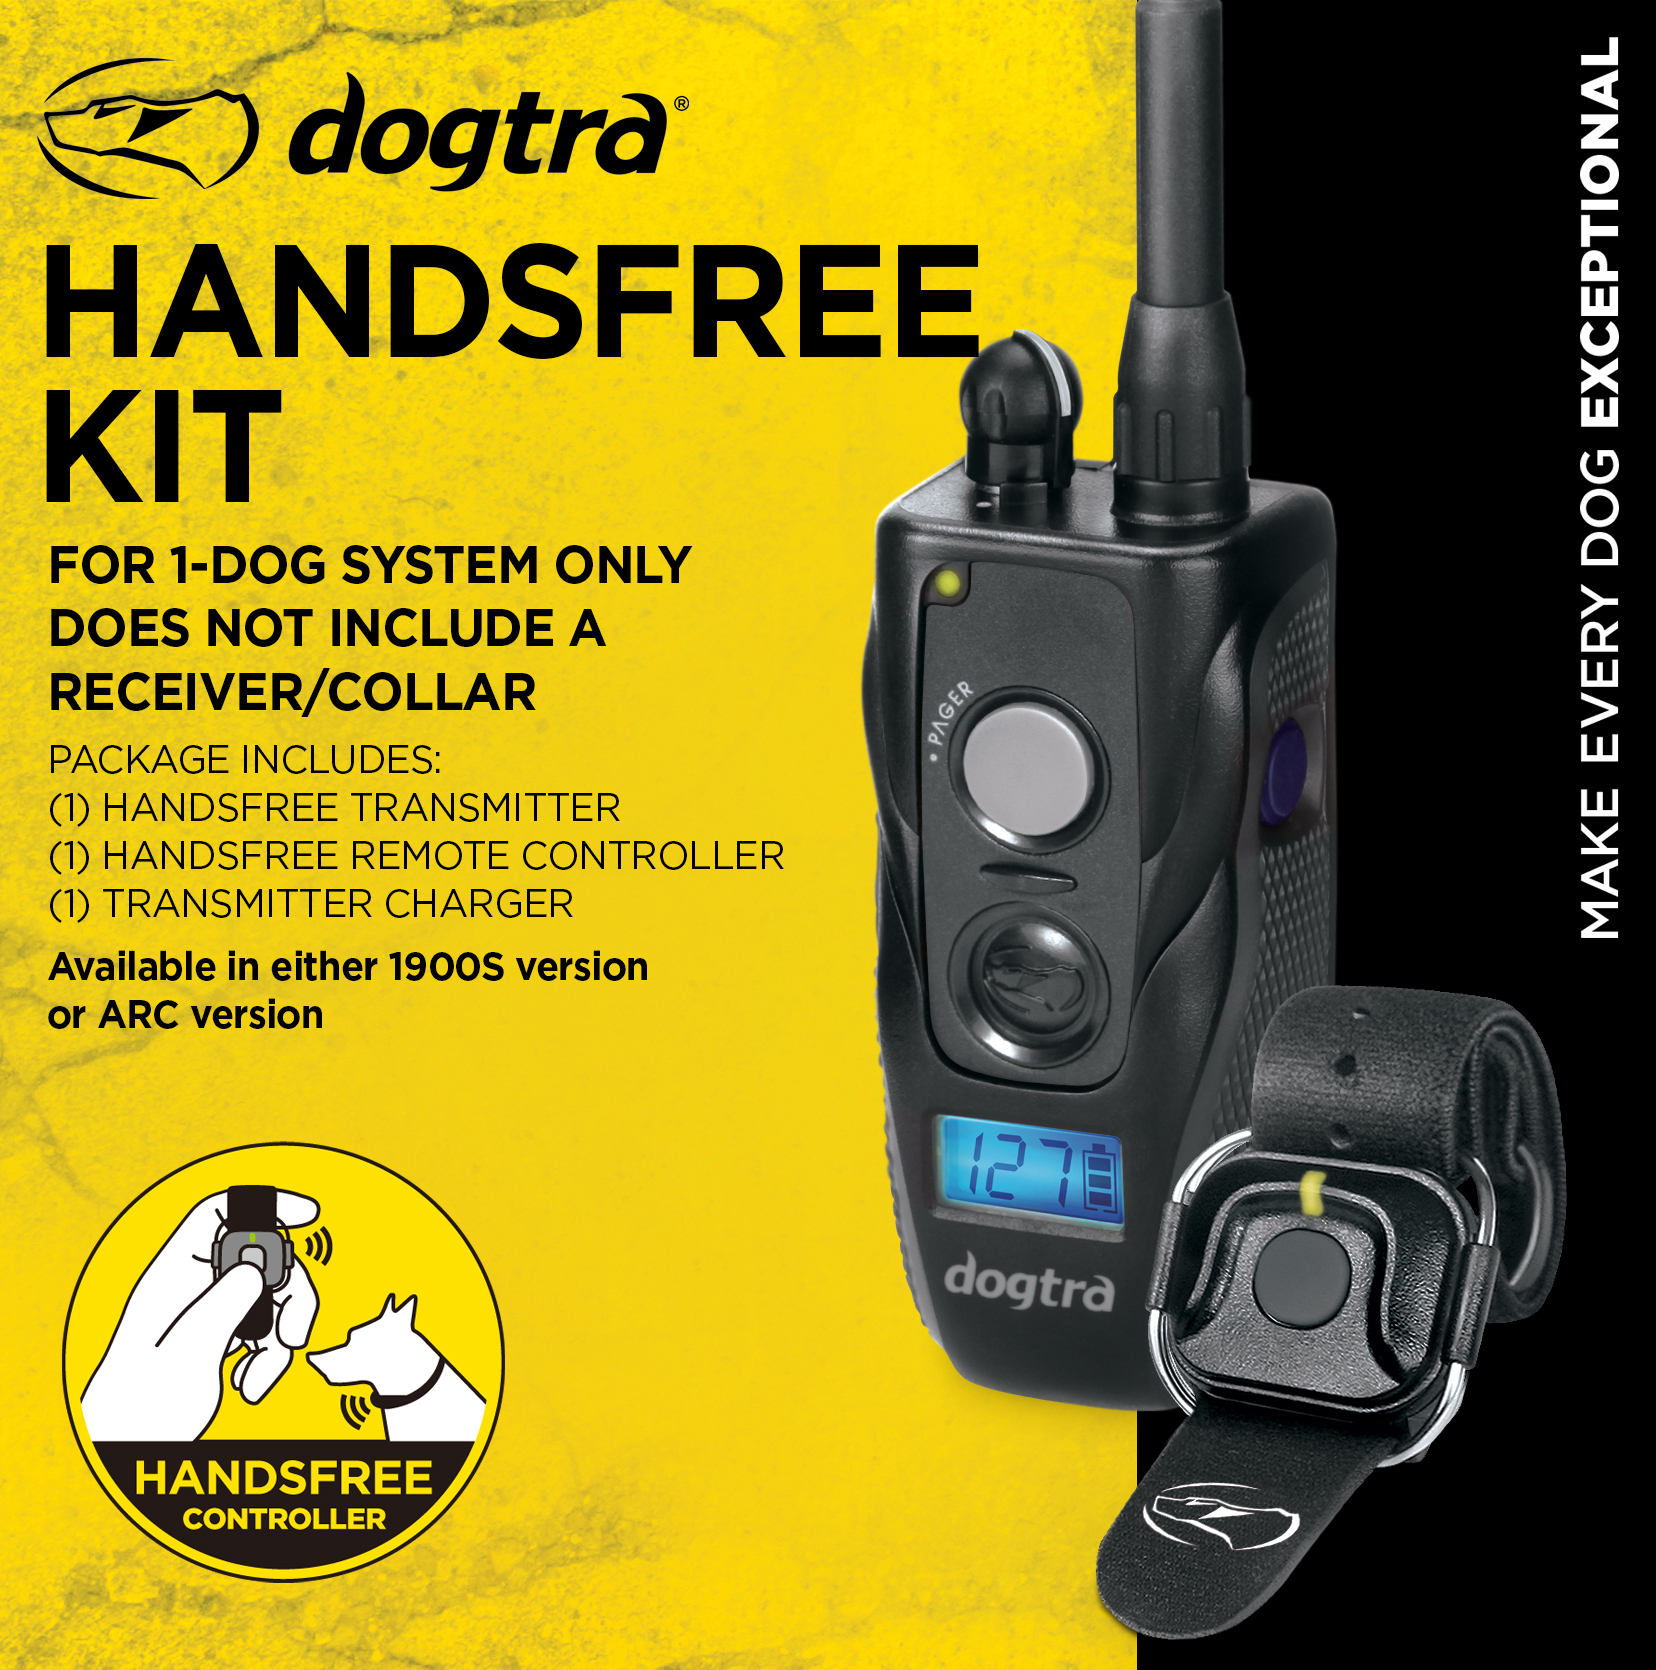 Handsfree Kit for Dogtra ARC